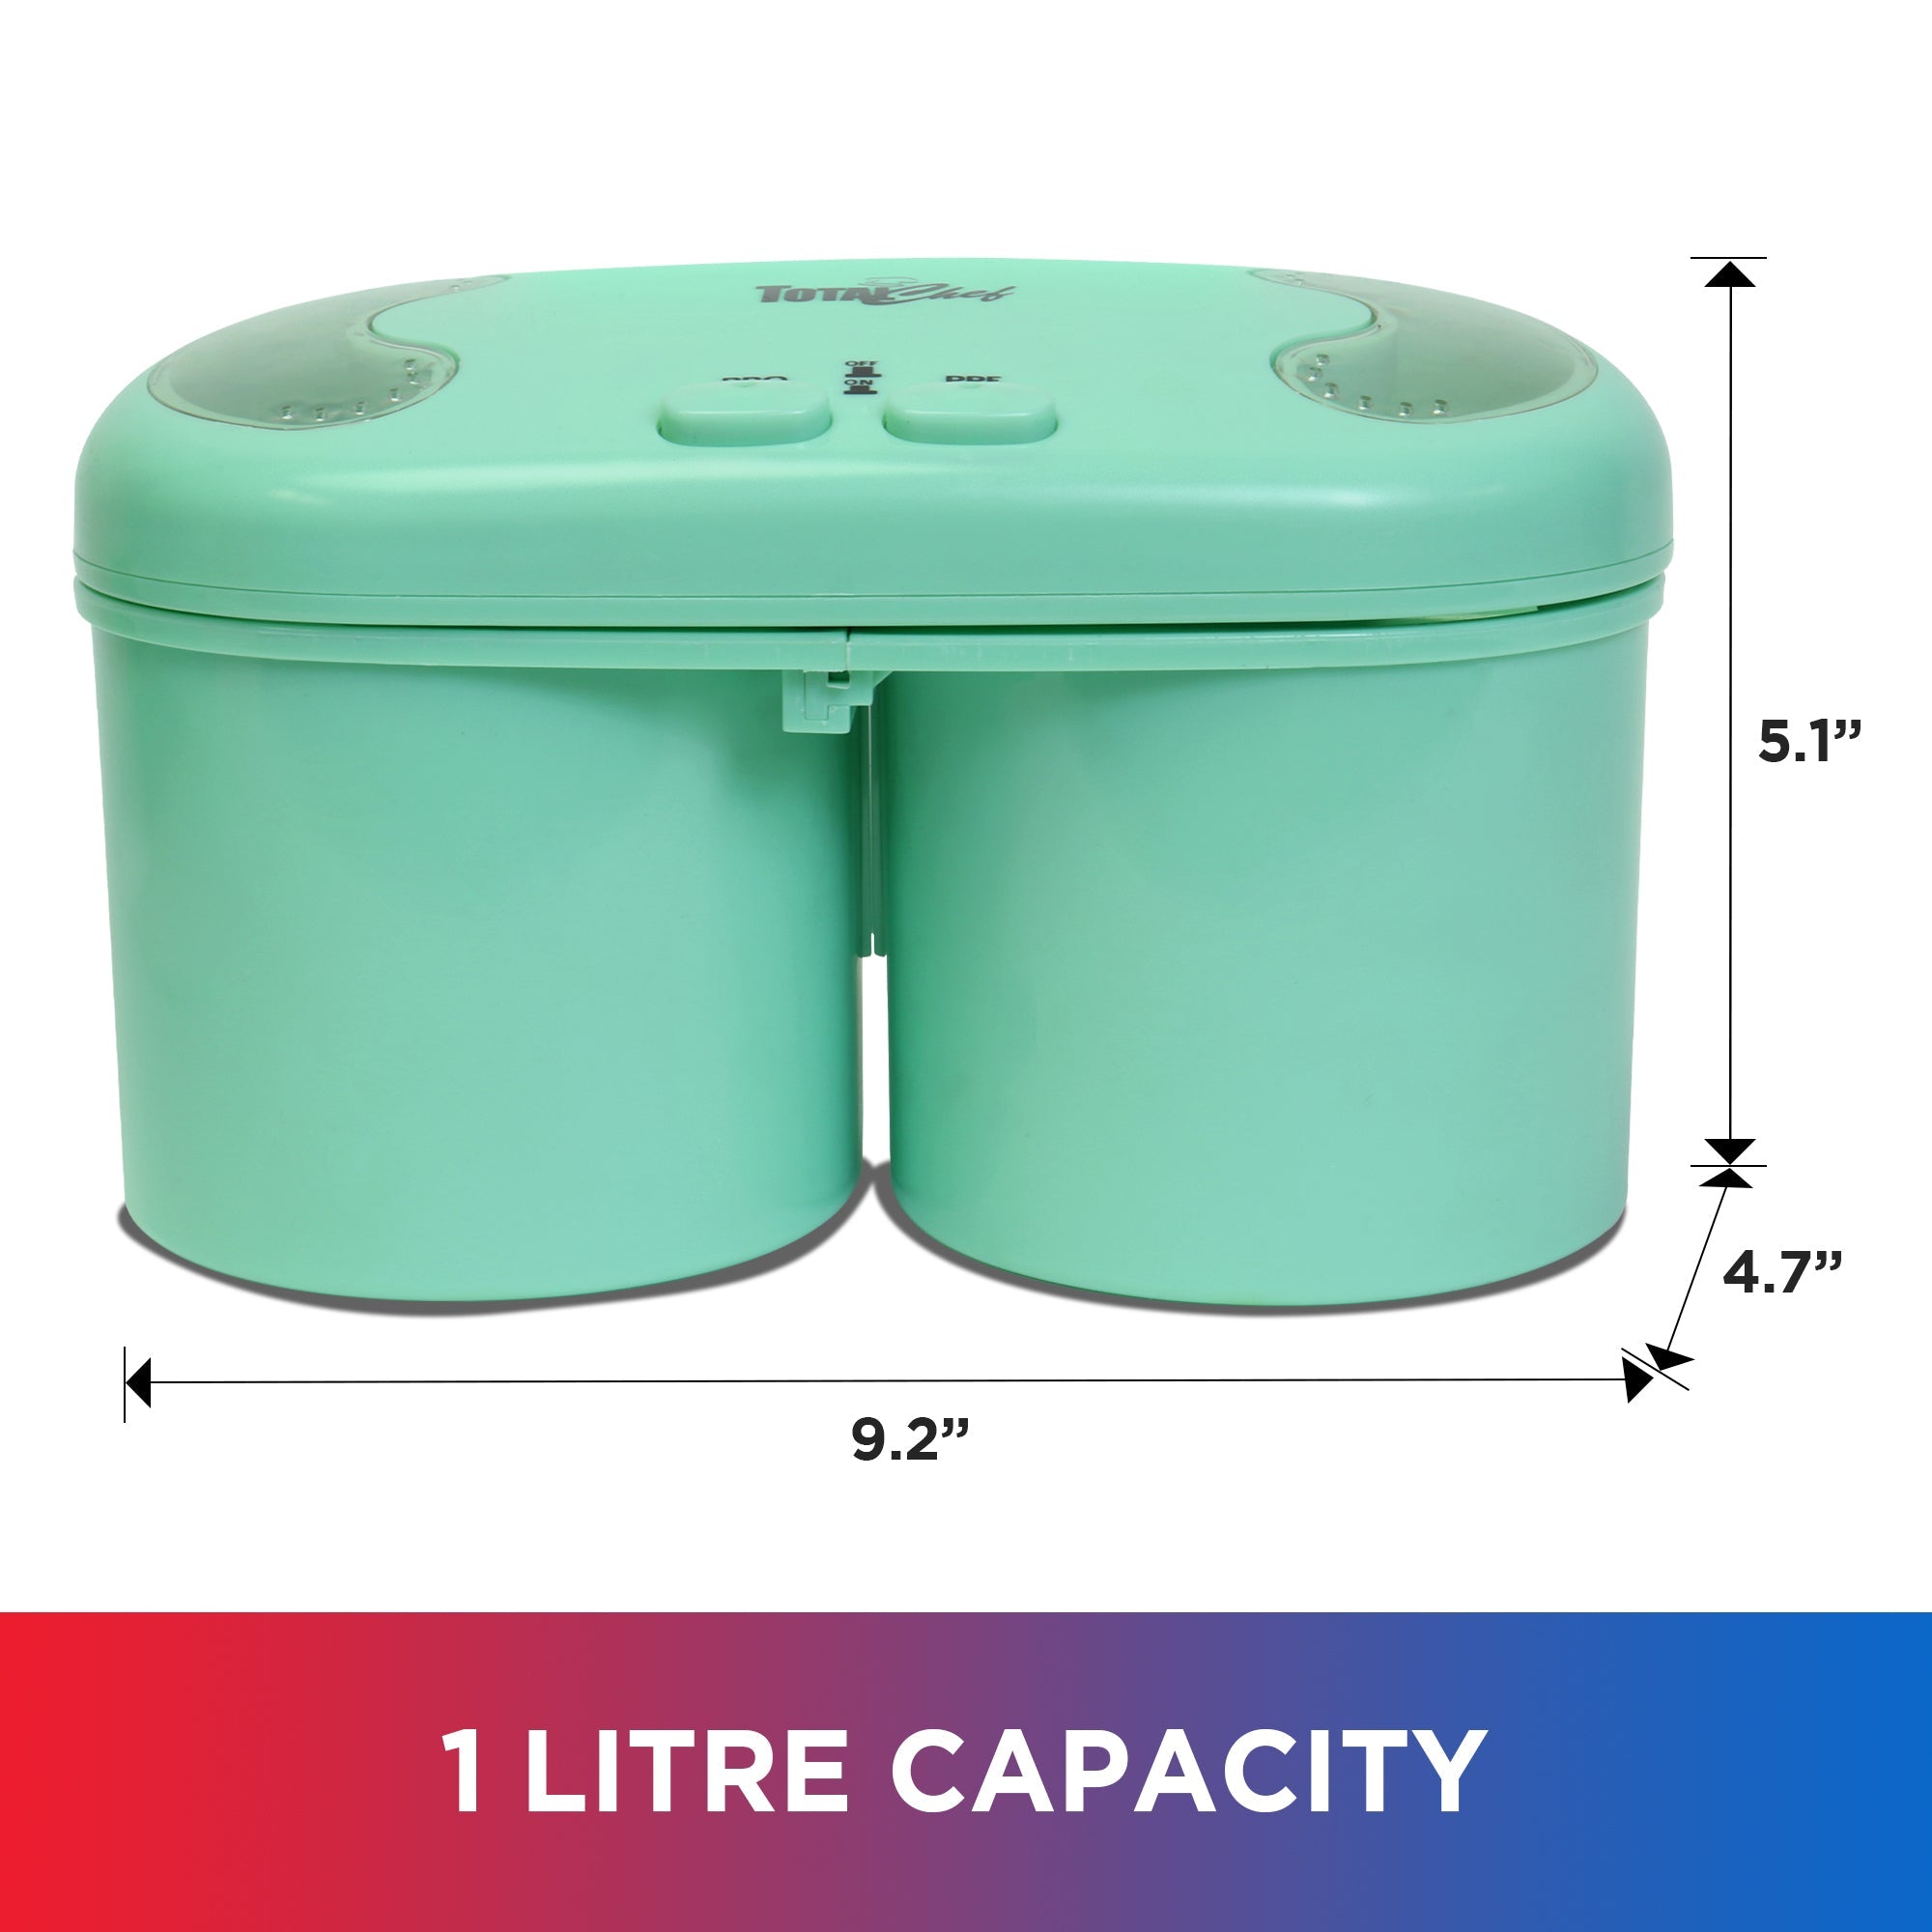 Product shot of ice cream maker on white background with dimensions. Text below reads, "1 litre capacity"